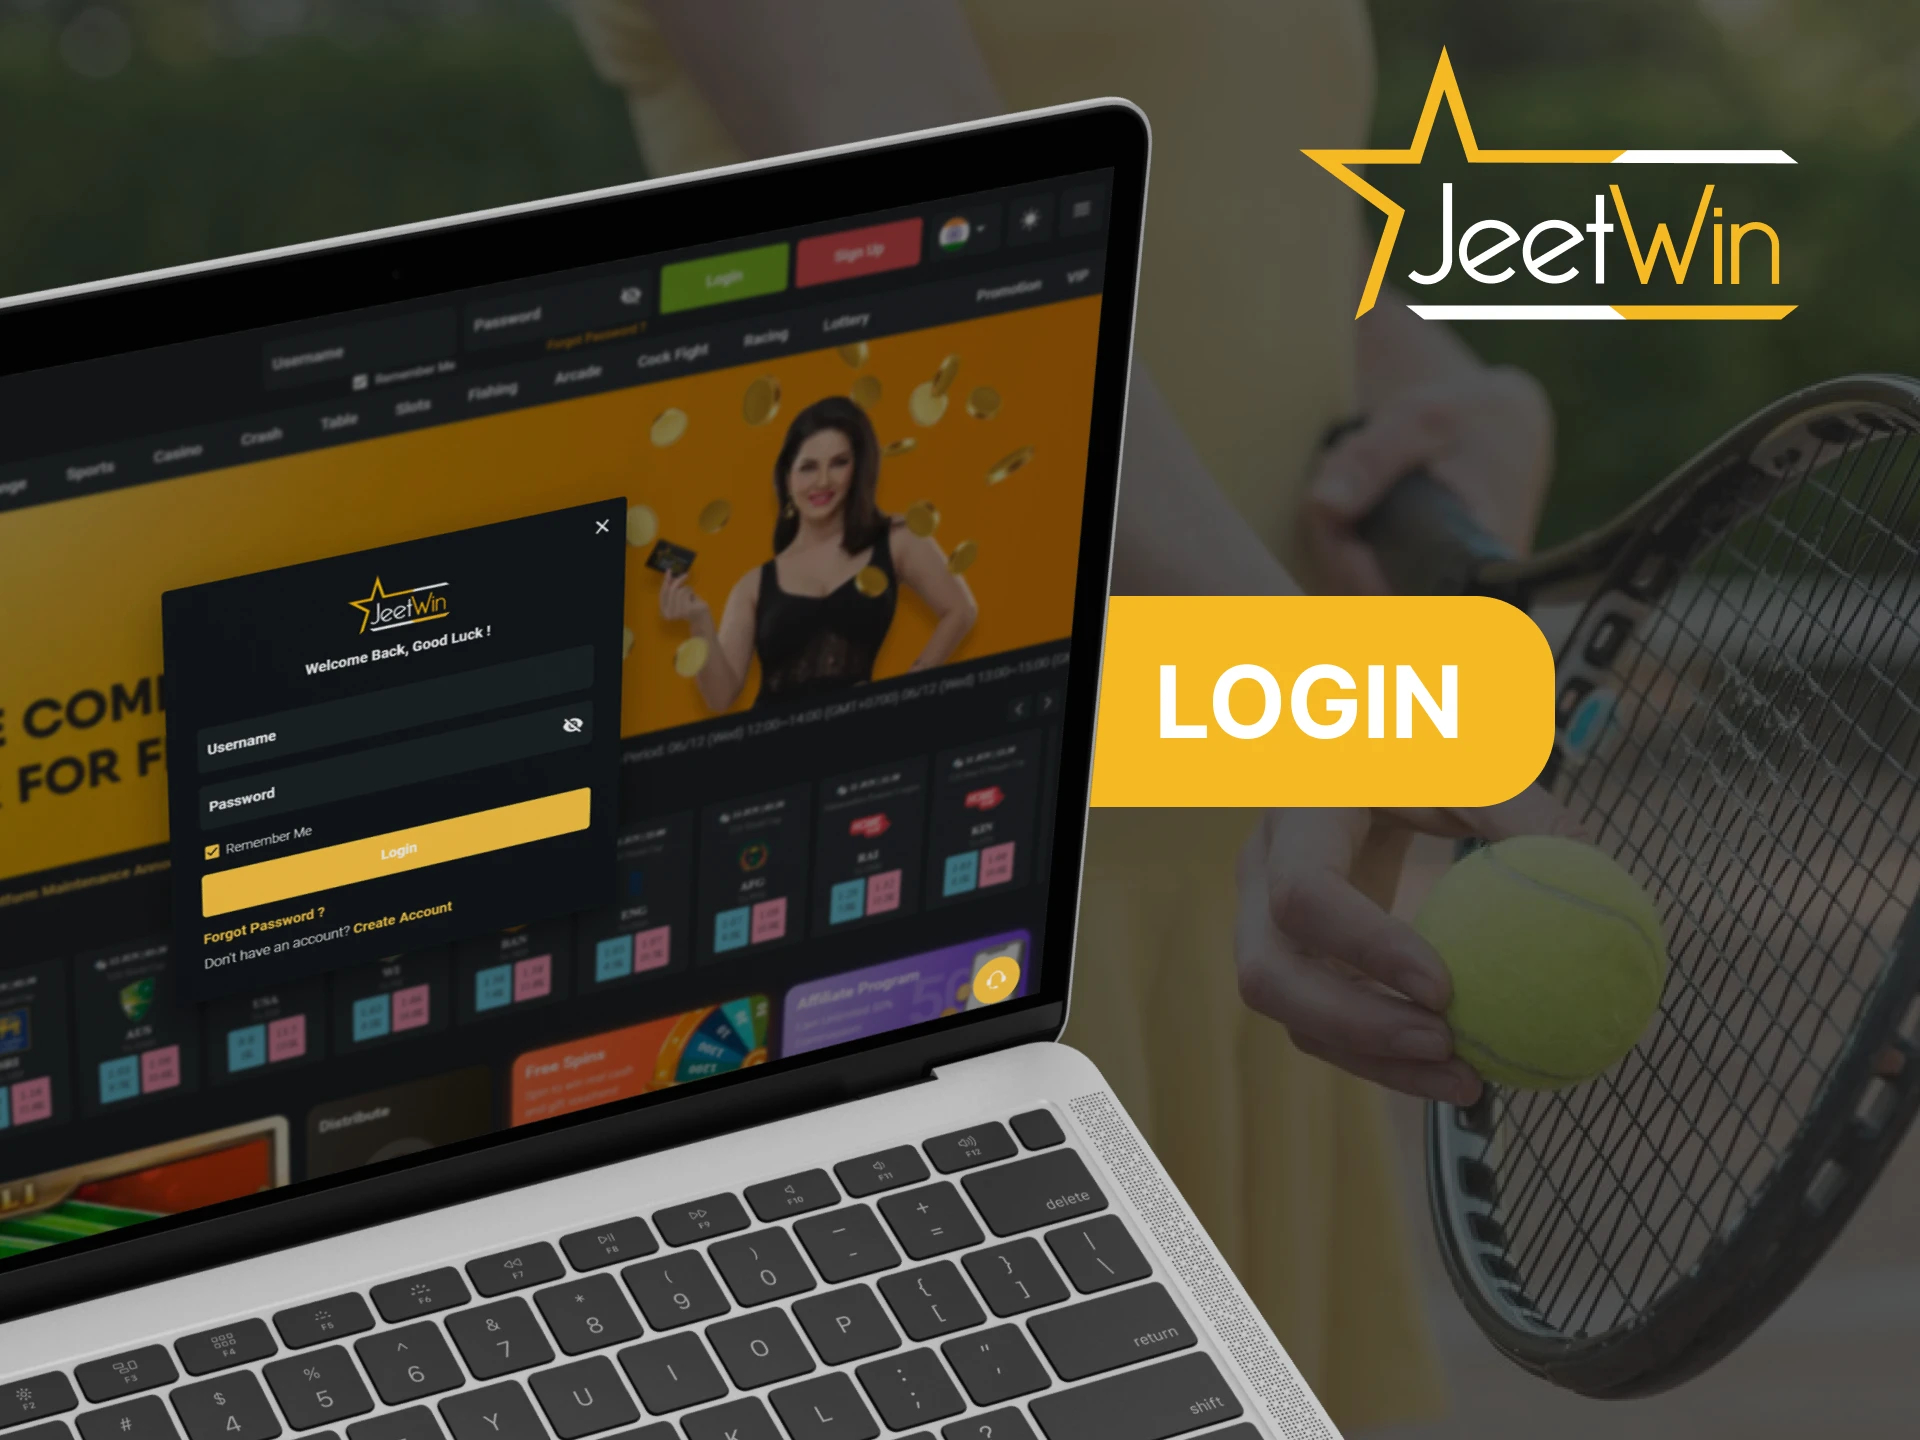 Login to Jeetwin by finding the login form on the home page.